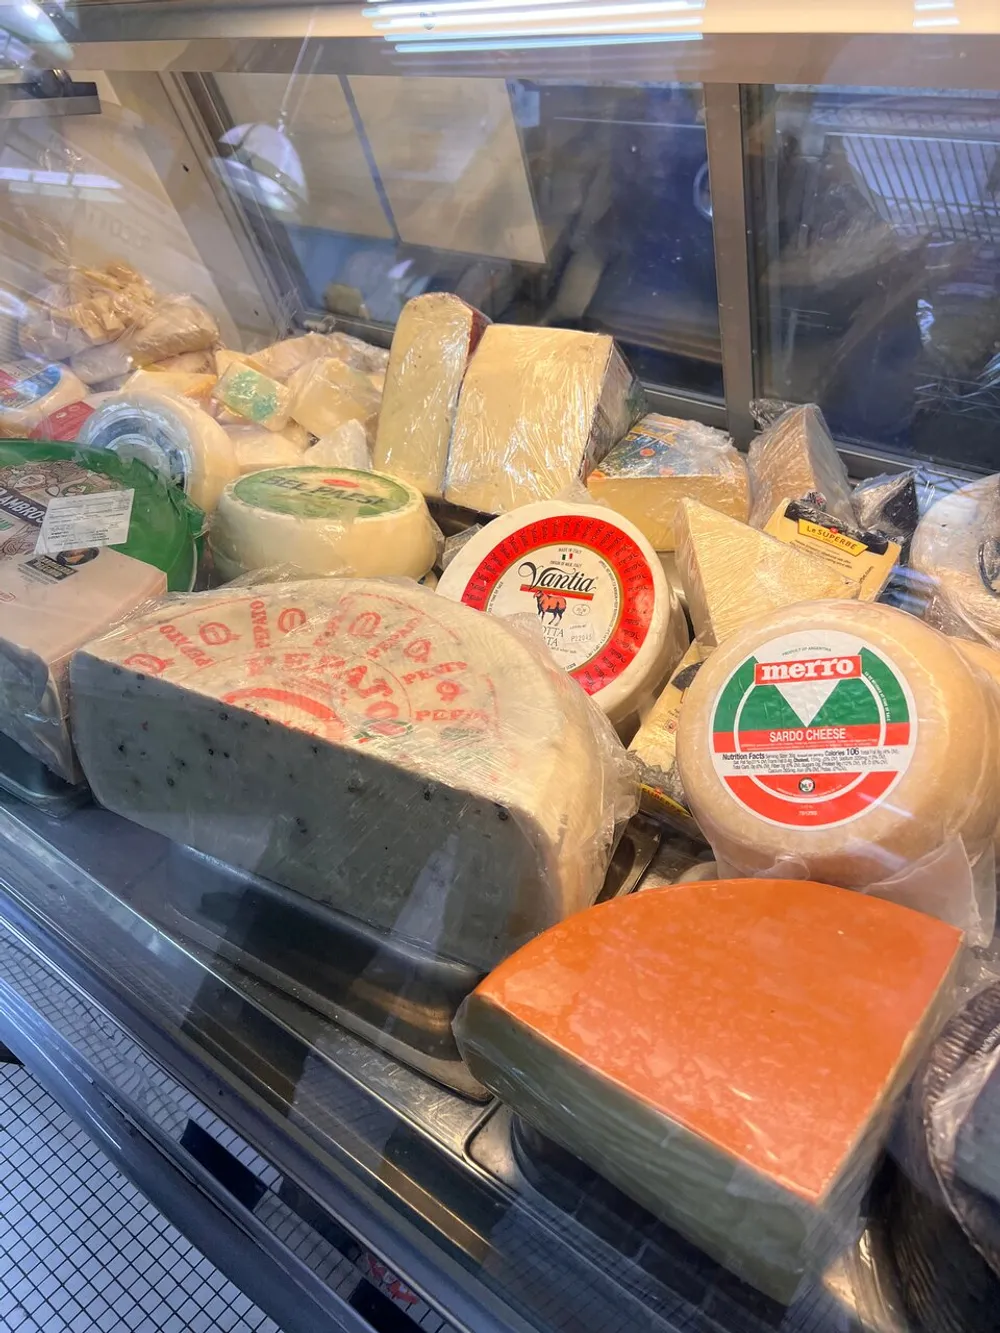 The image shows a variety of cheeses displayed in a refrigerated deli case